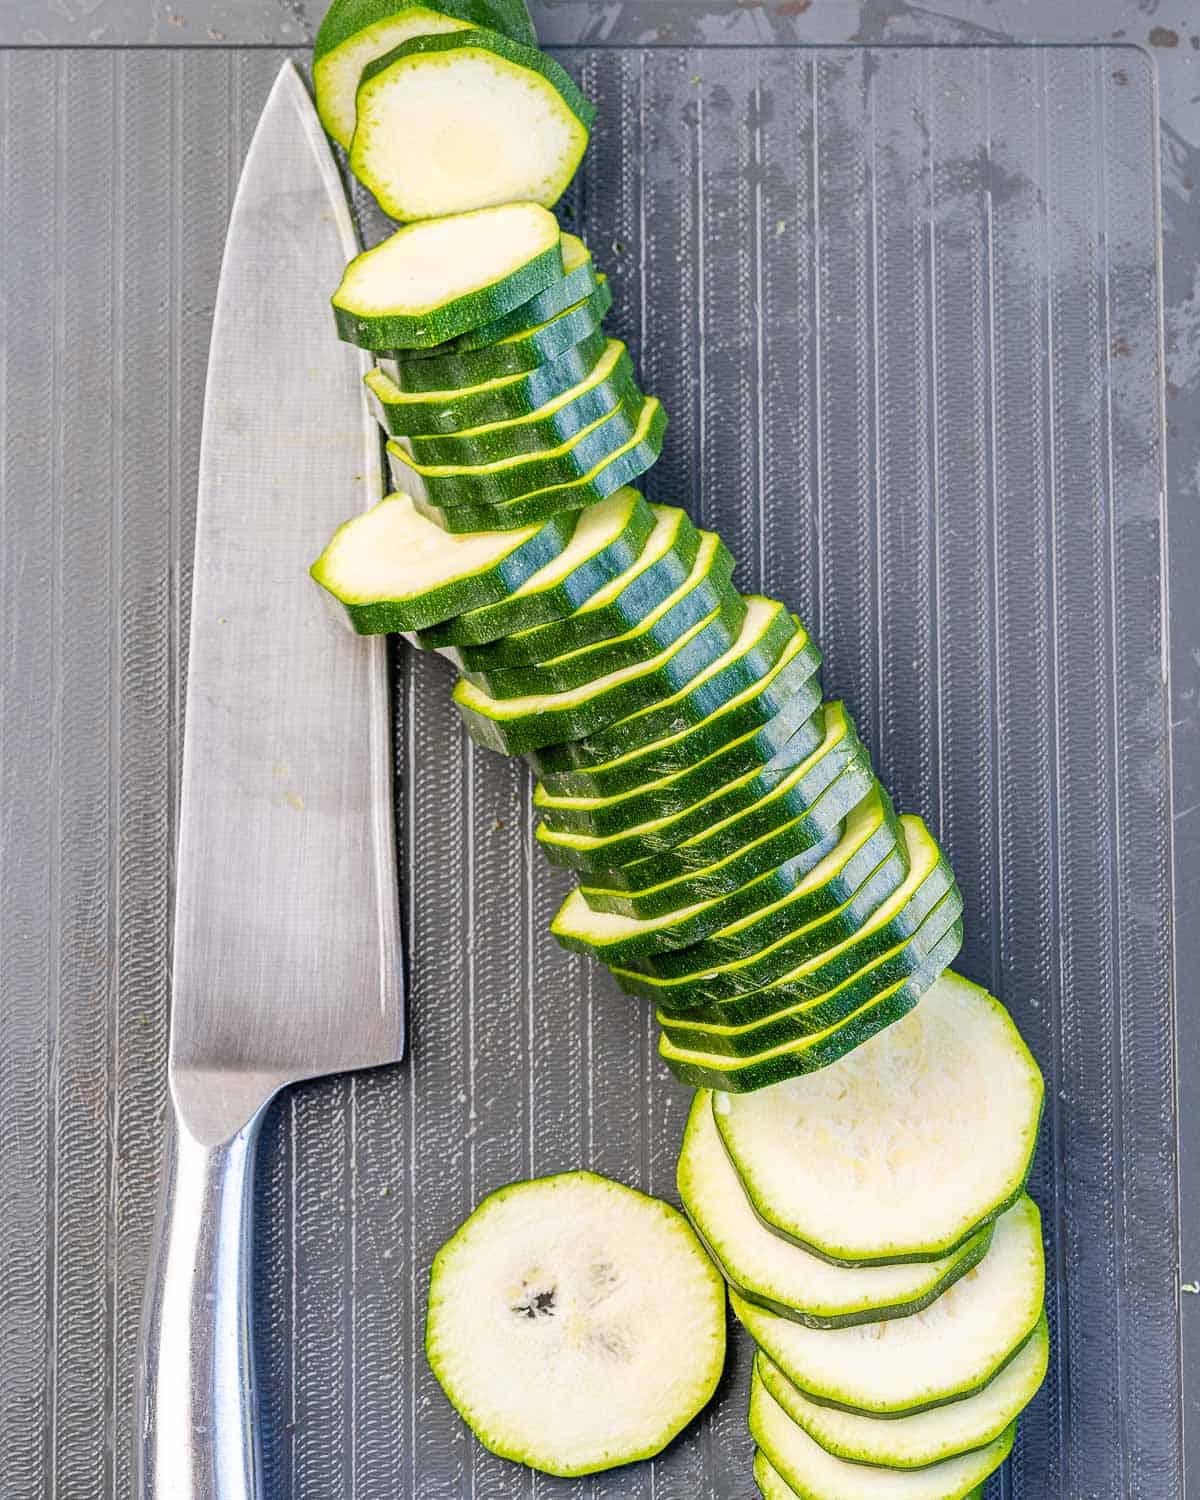 sliced zucchini with knife and cutting board